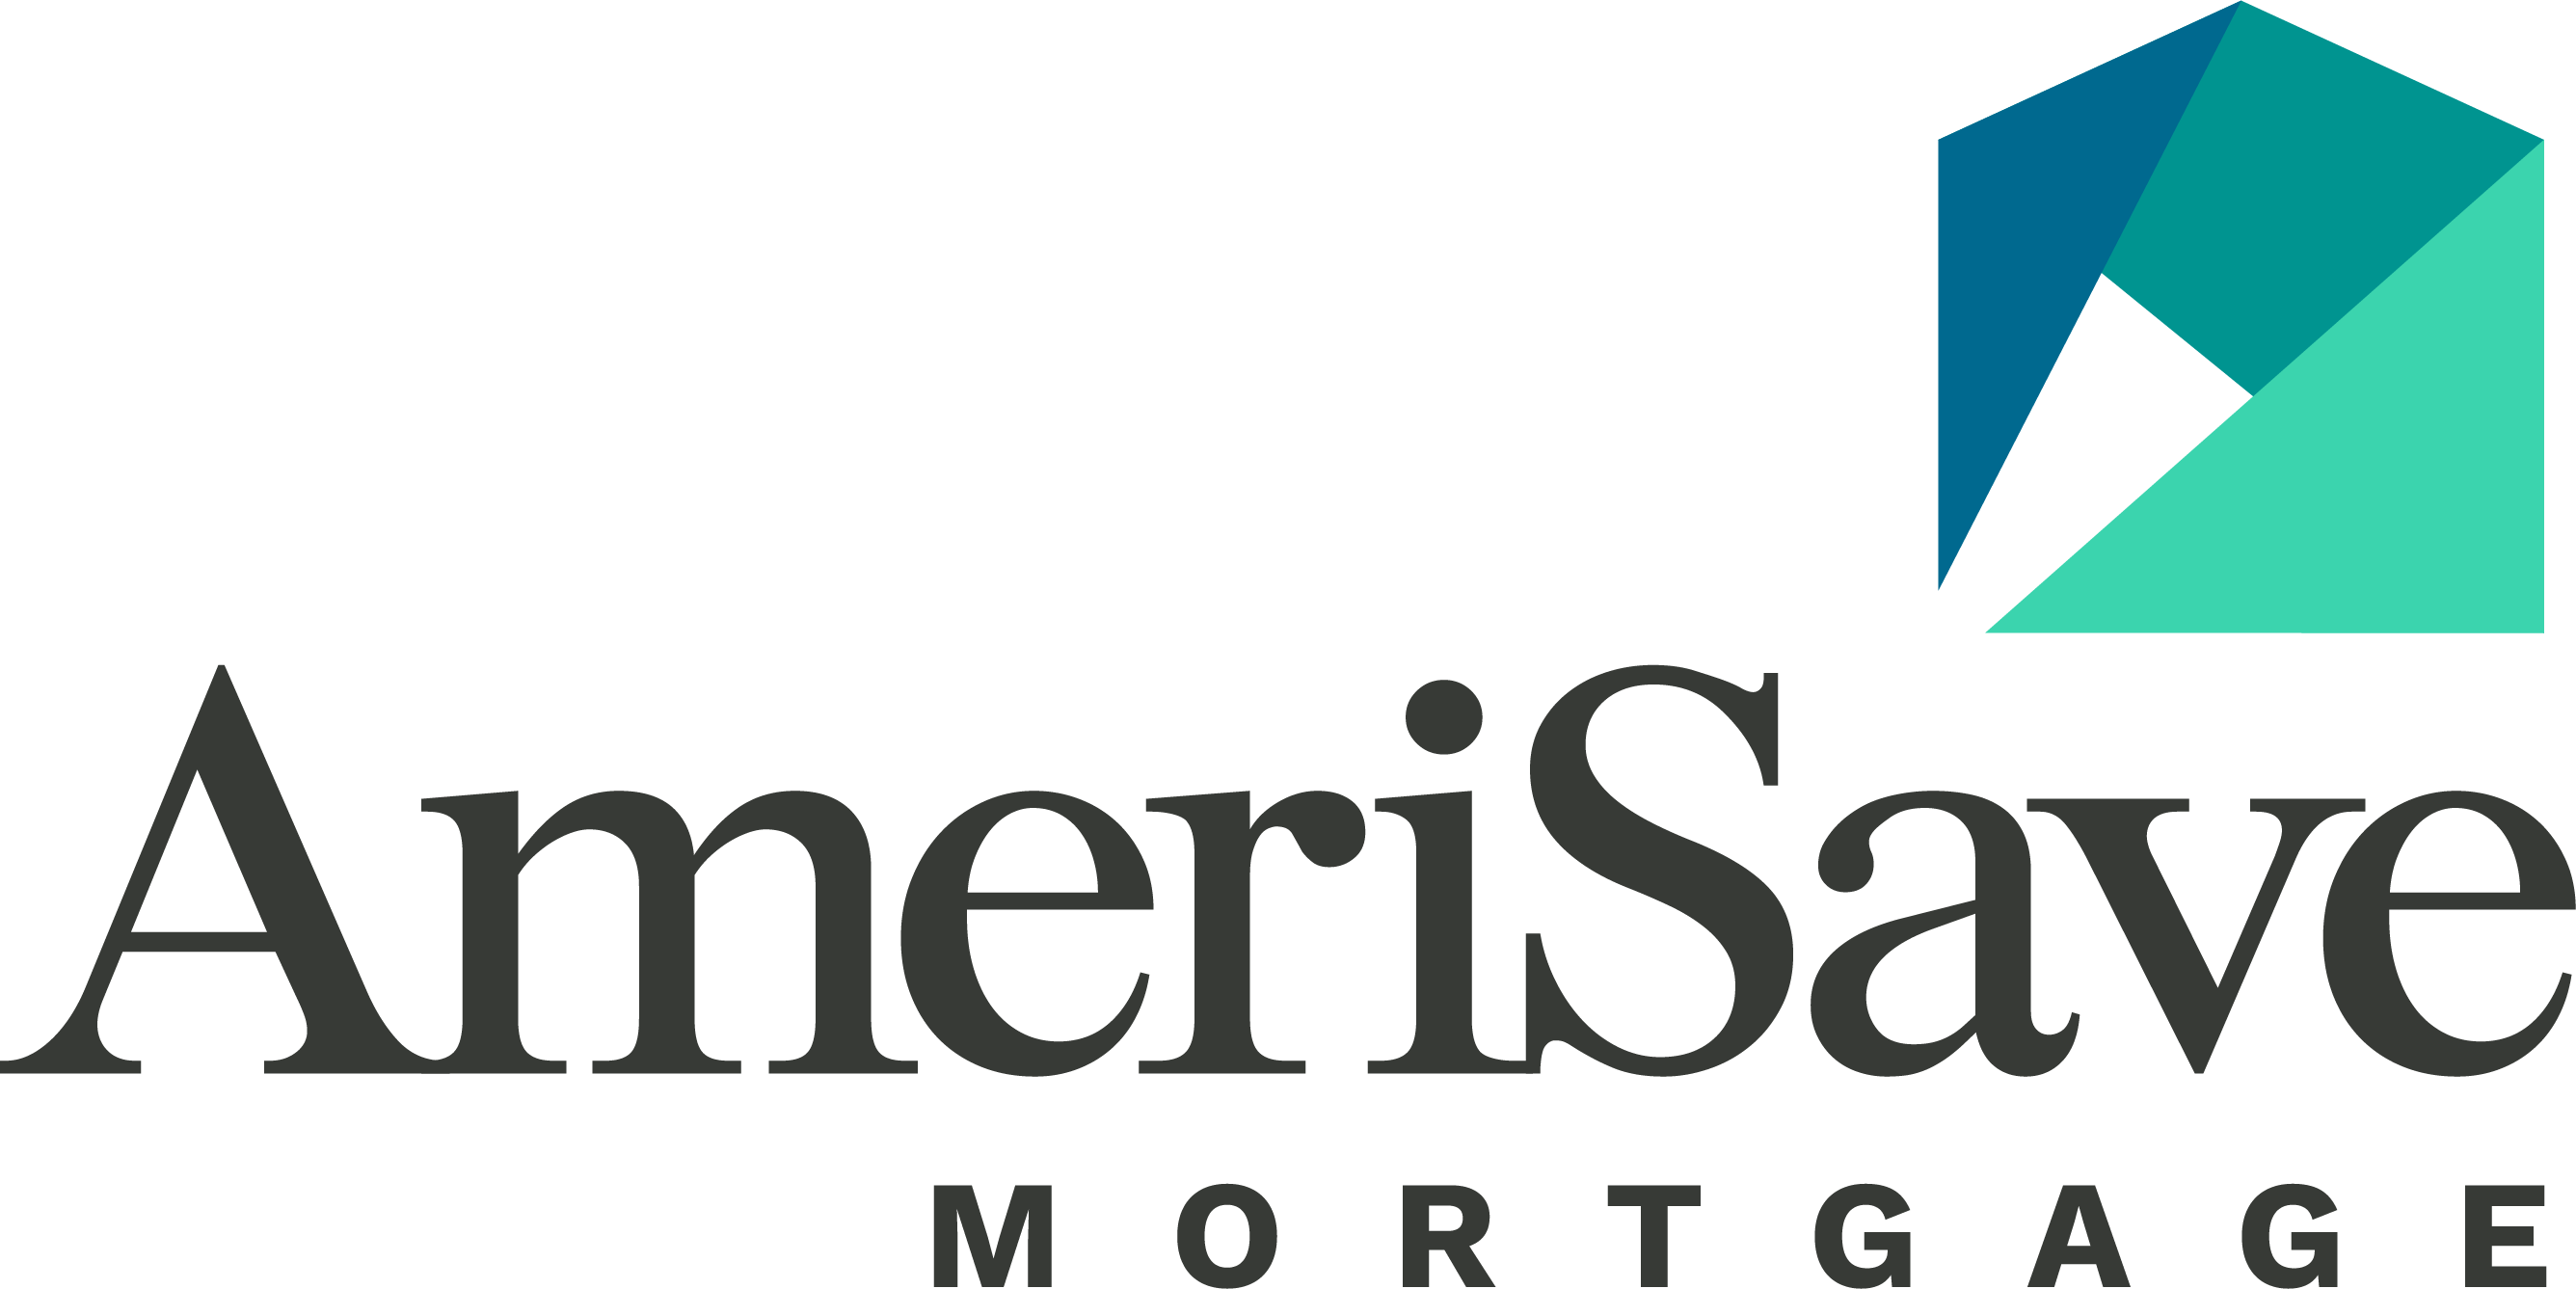 Downloadable Free Mortgage Calculator Tool